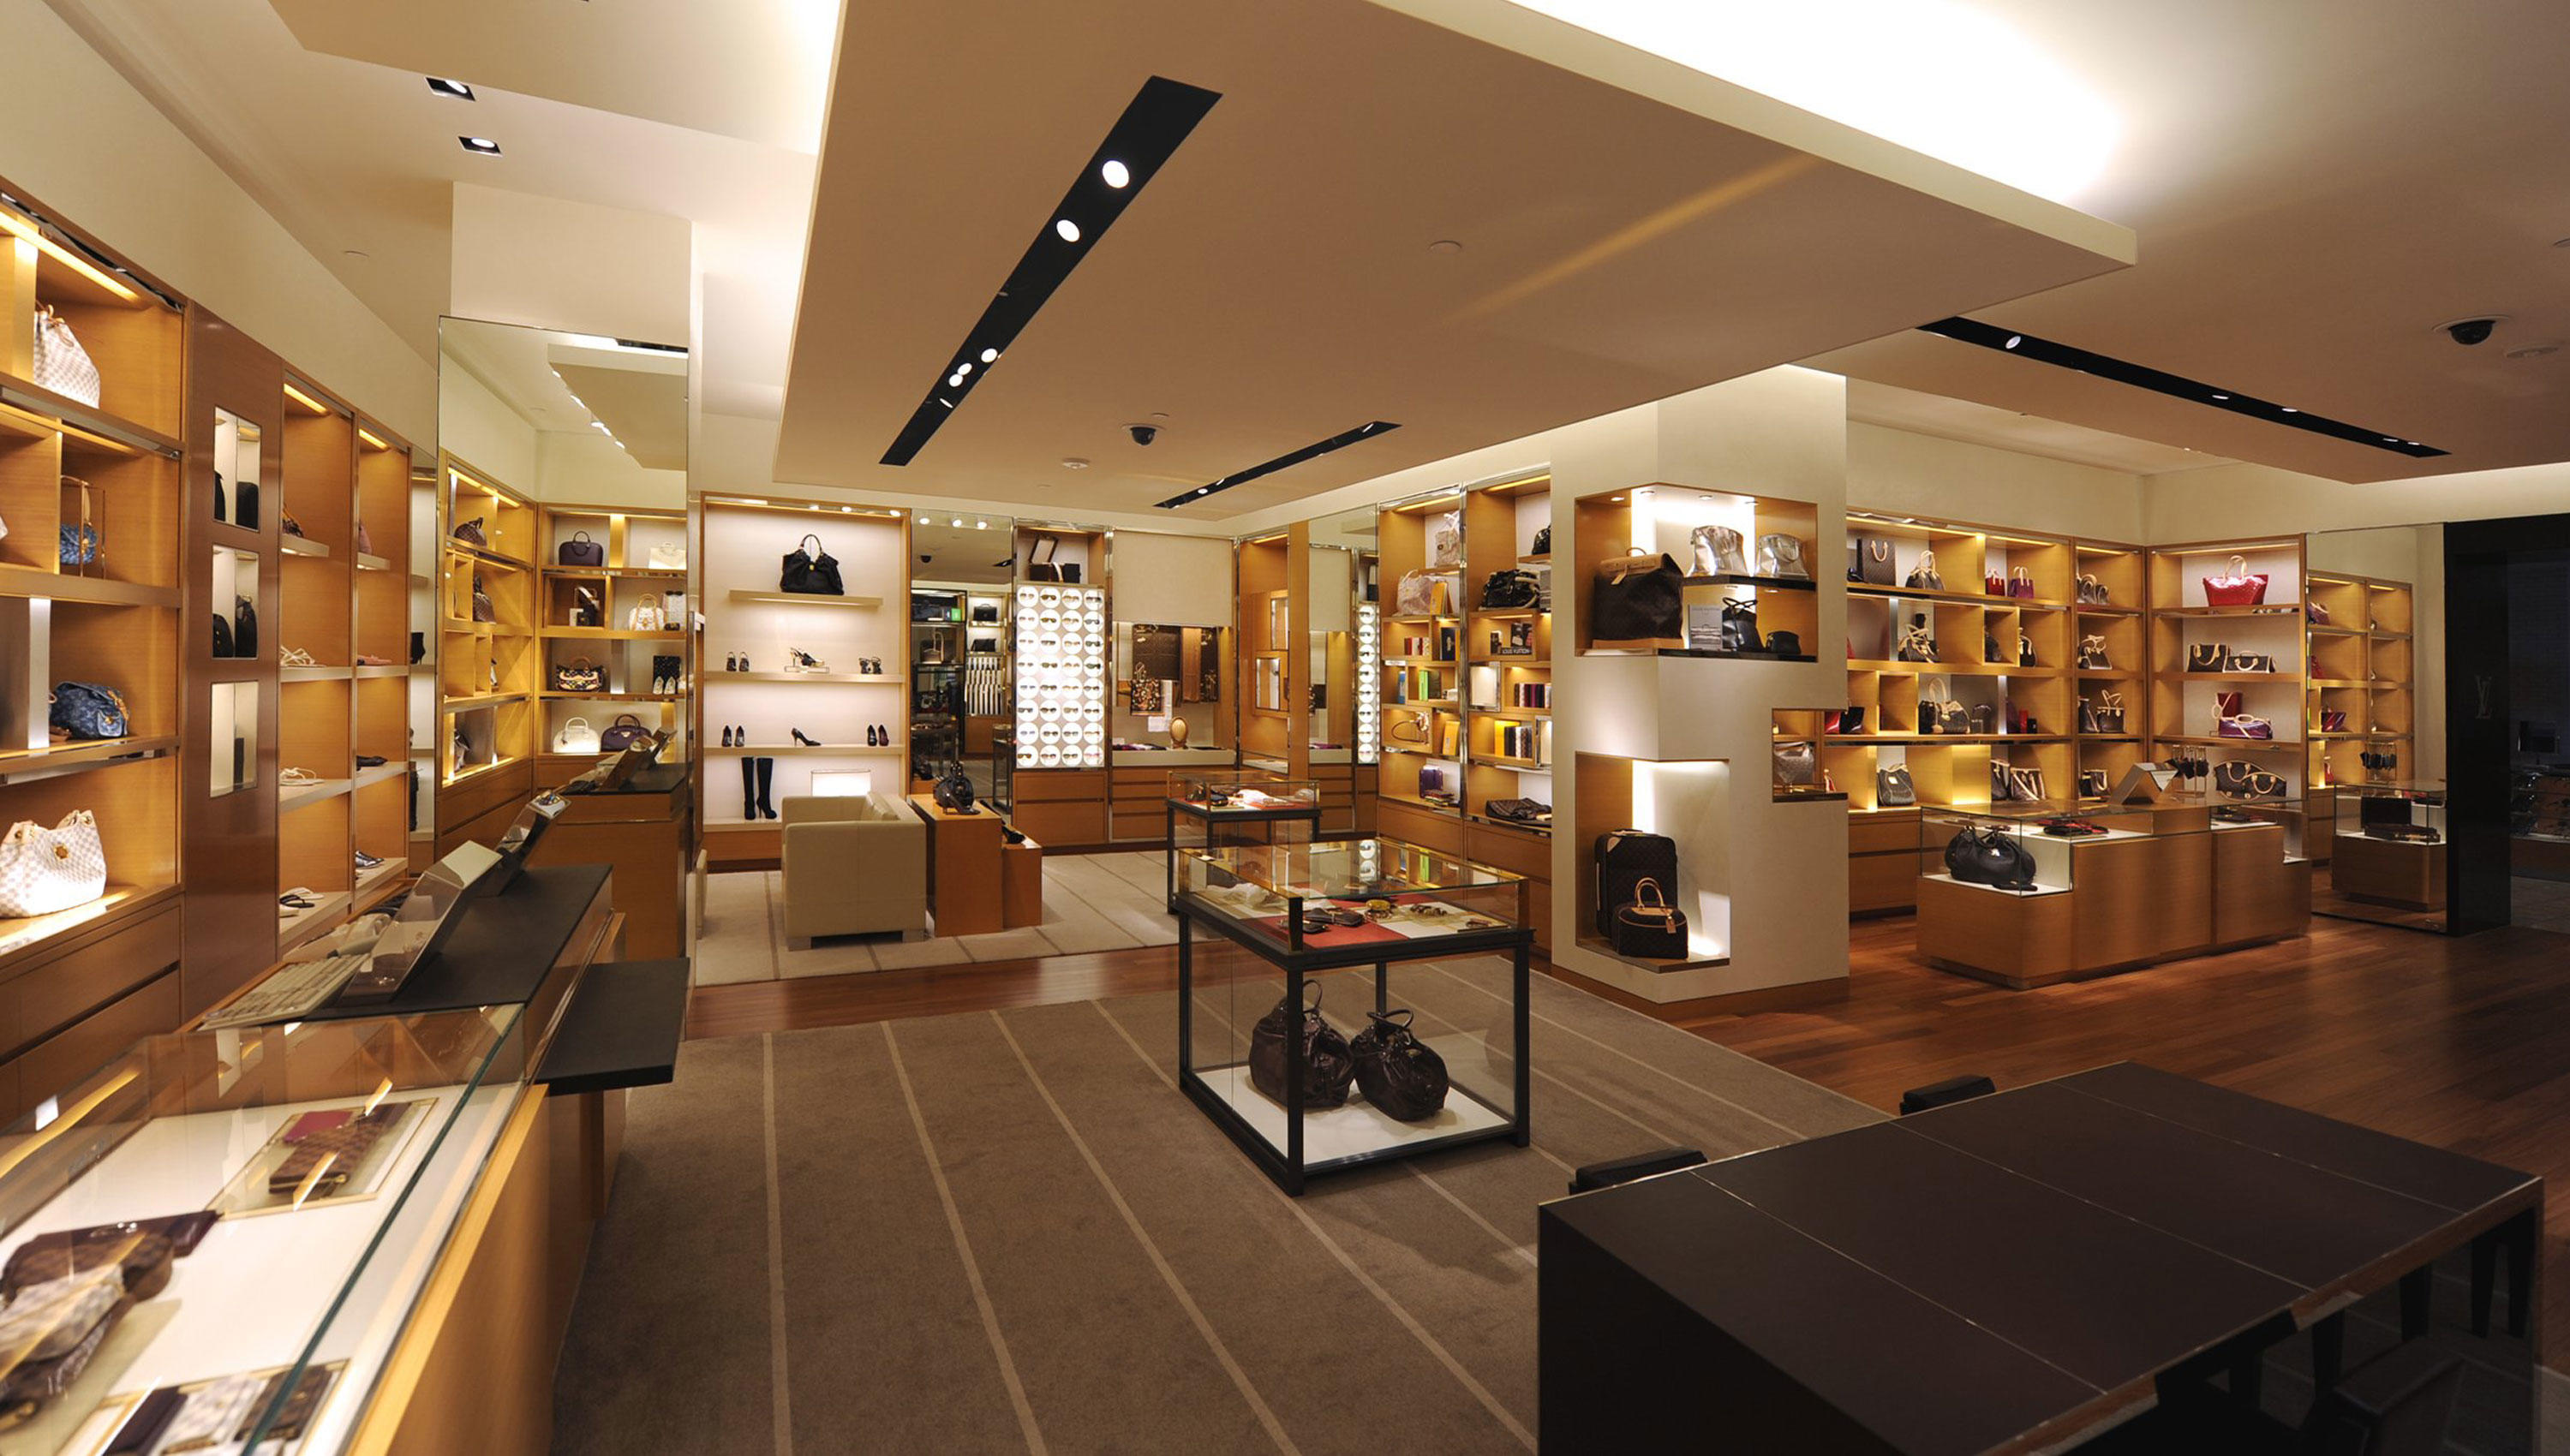 Get directions, reviews and information for Louis Vuitton Dallas Neiman Mar...